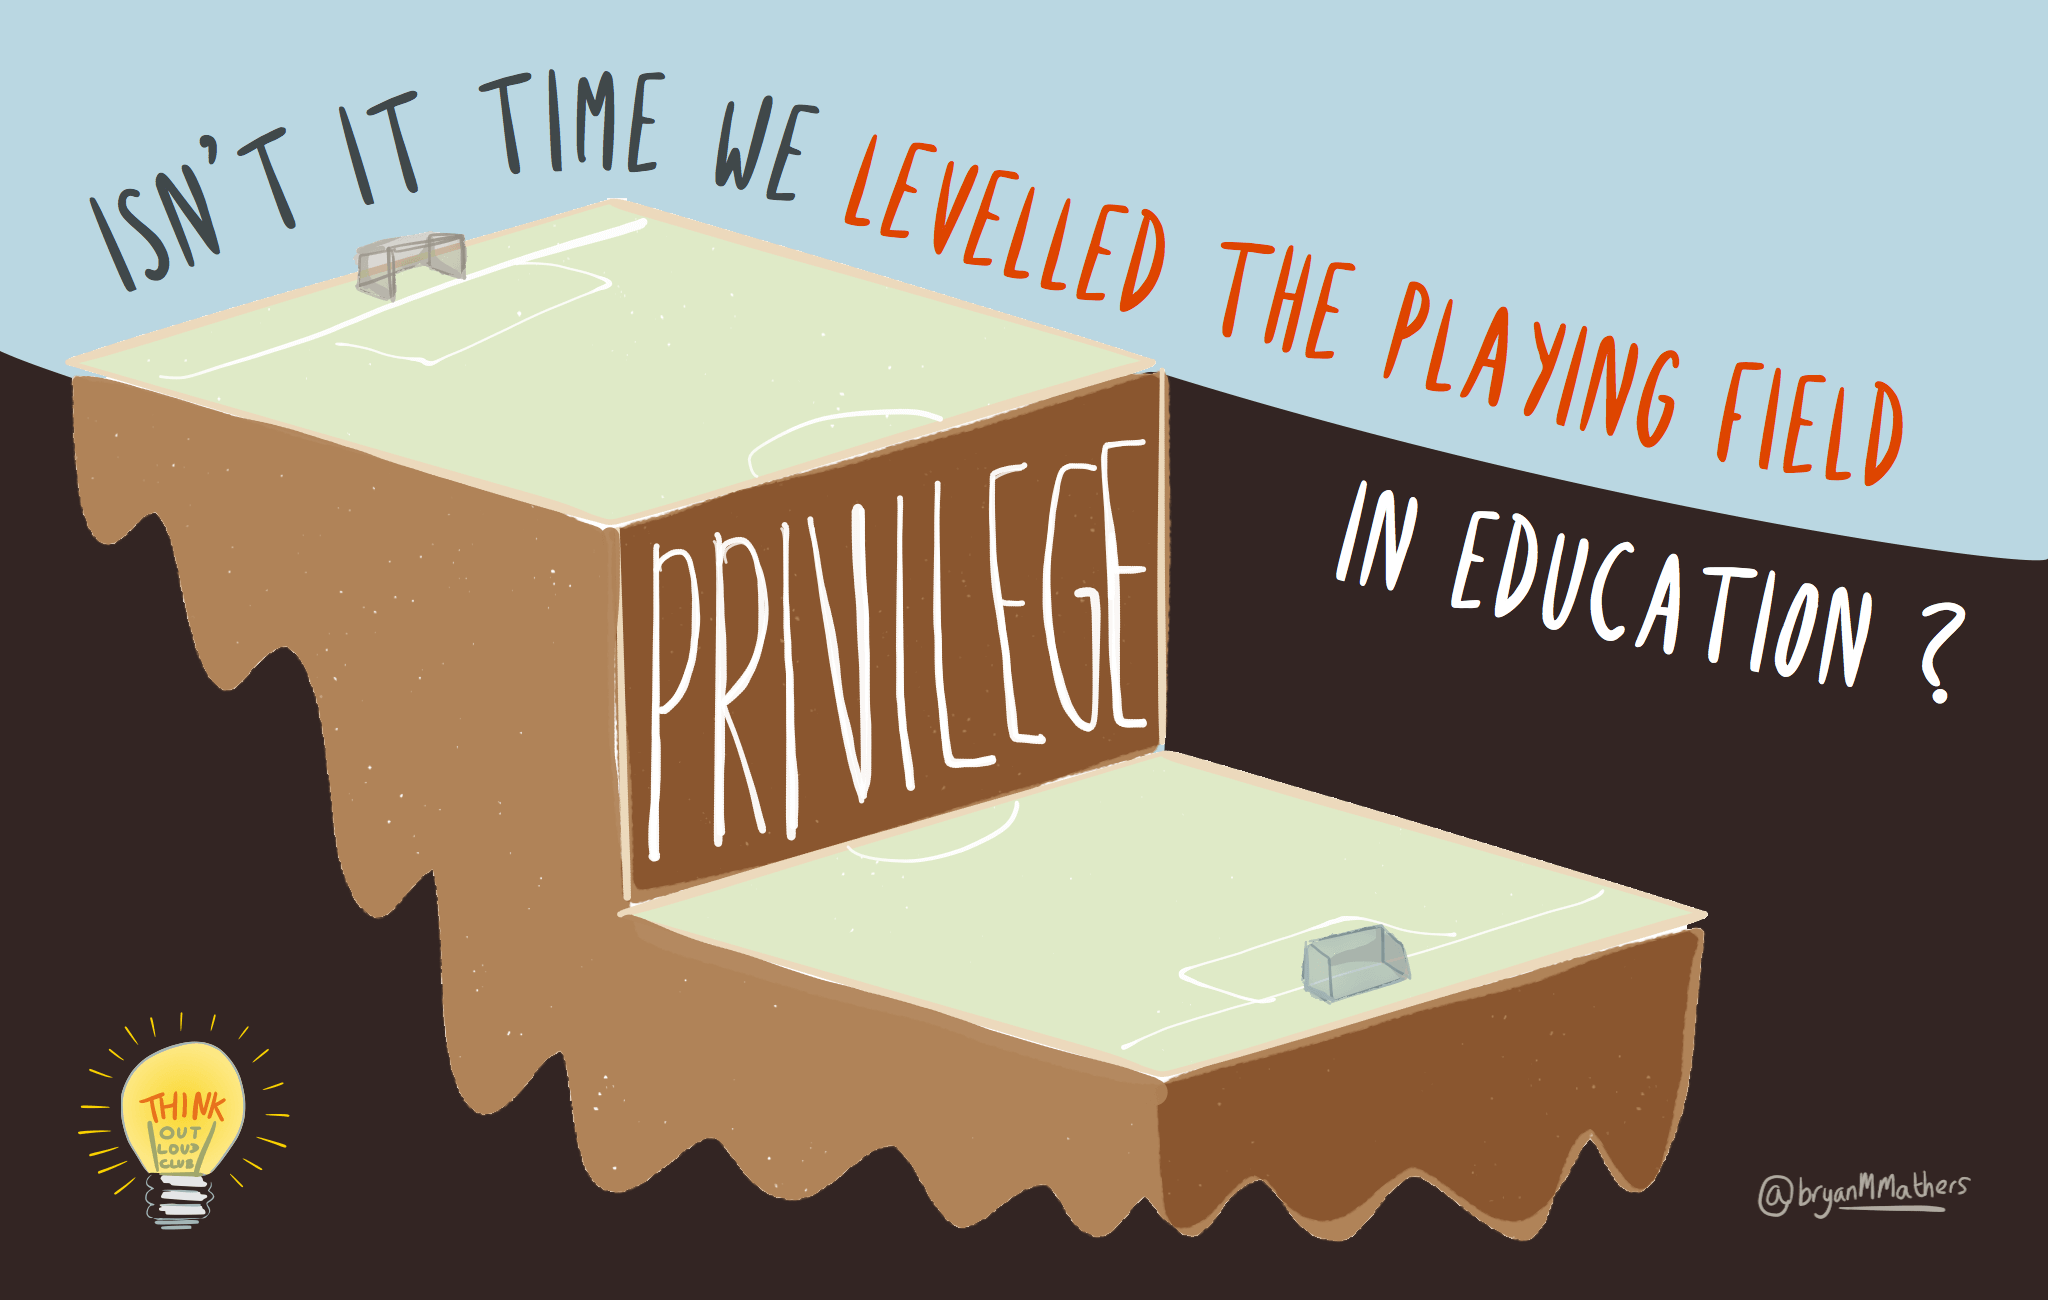 Levelling the Playing Field